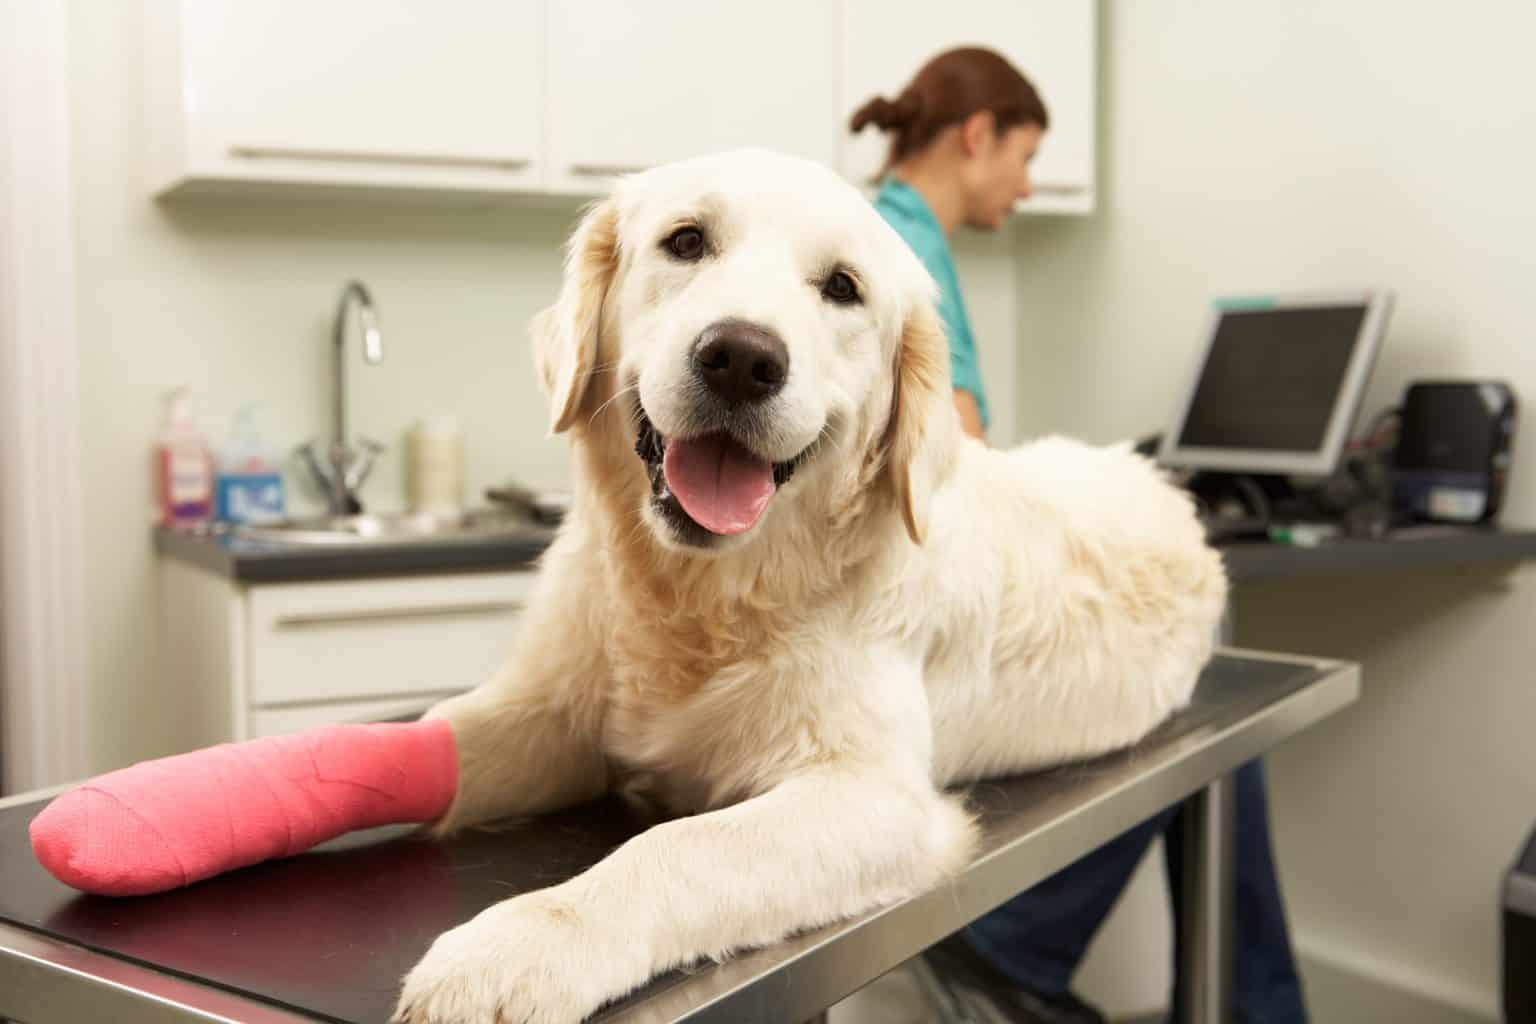 Golden retriever with injured front leg. If your dog is limping, take action. A limp may mean a minor injury or a severe problem such as hip dysplasia or a bone tumor.